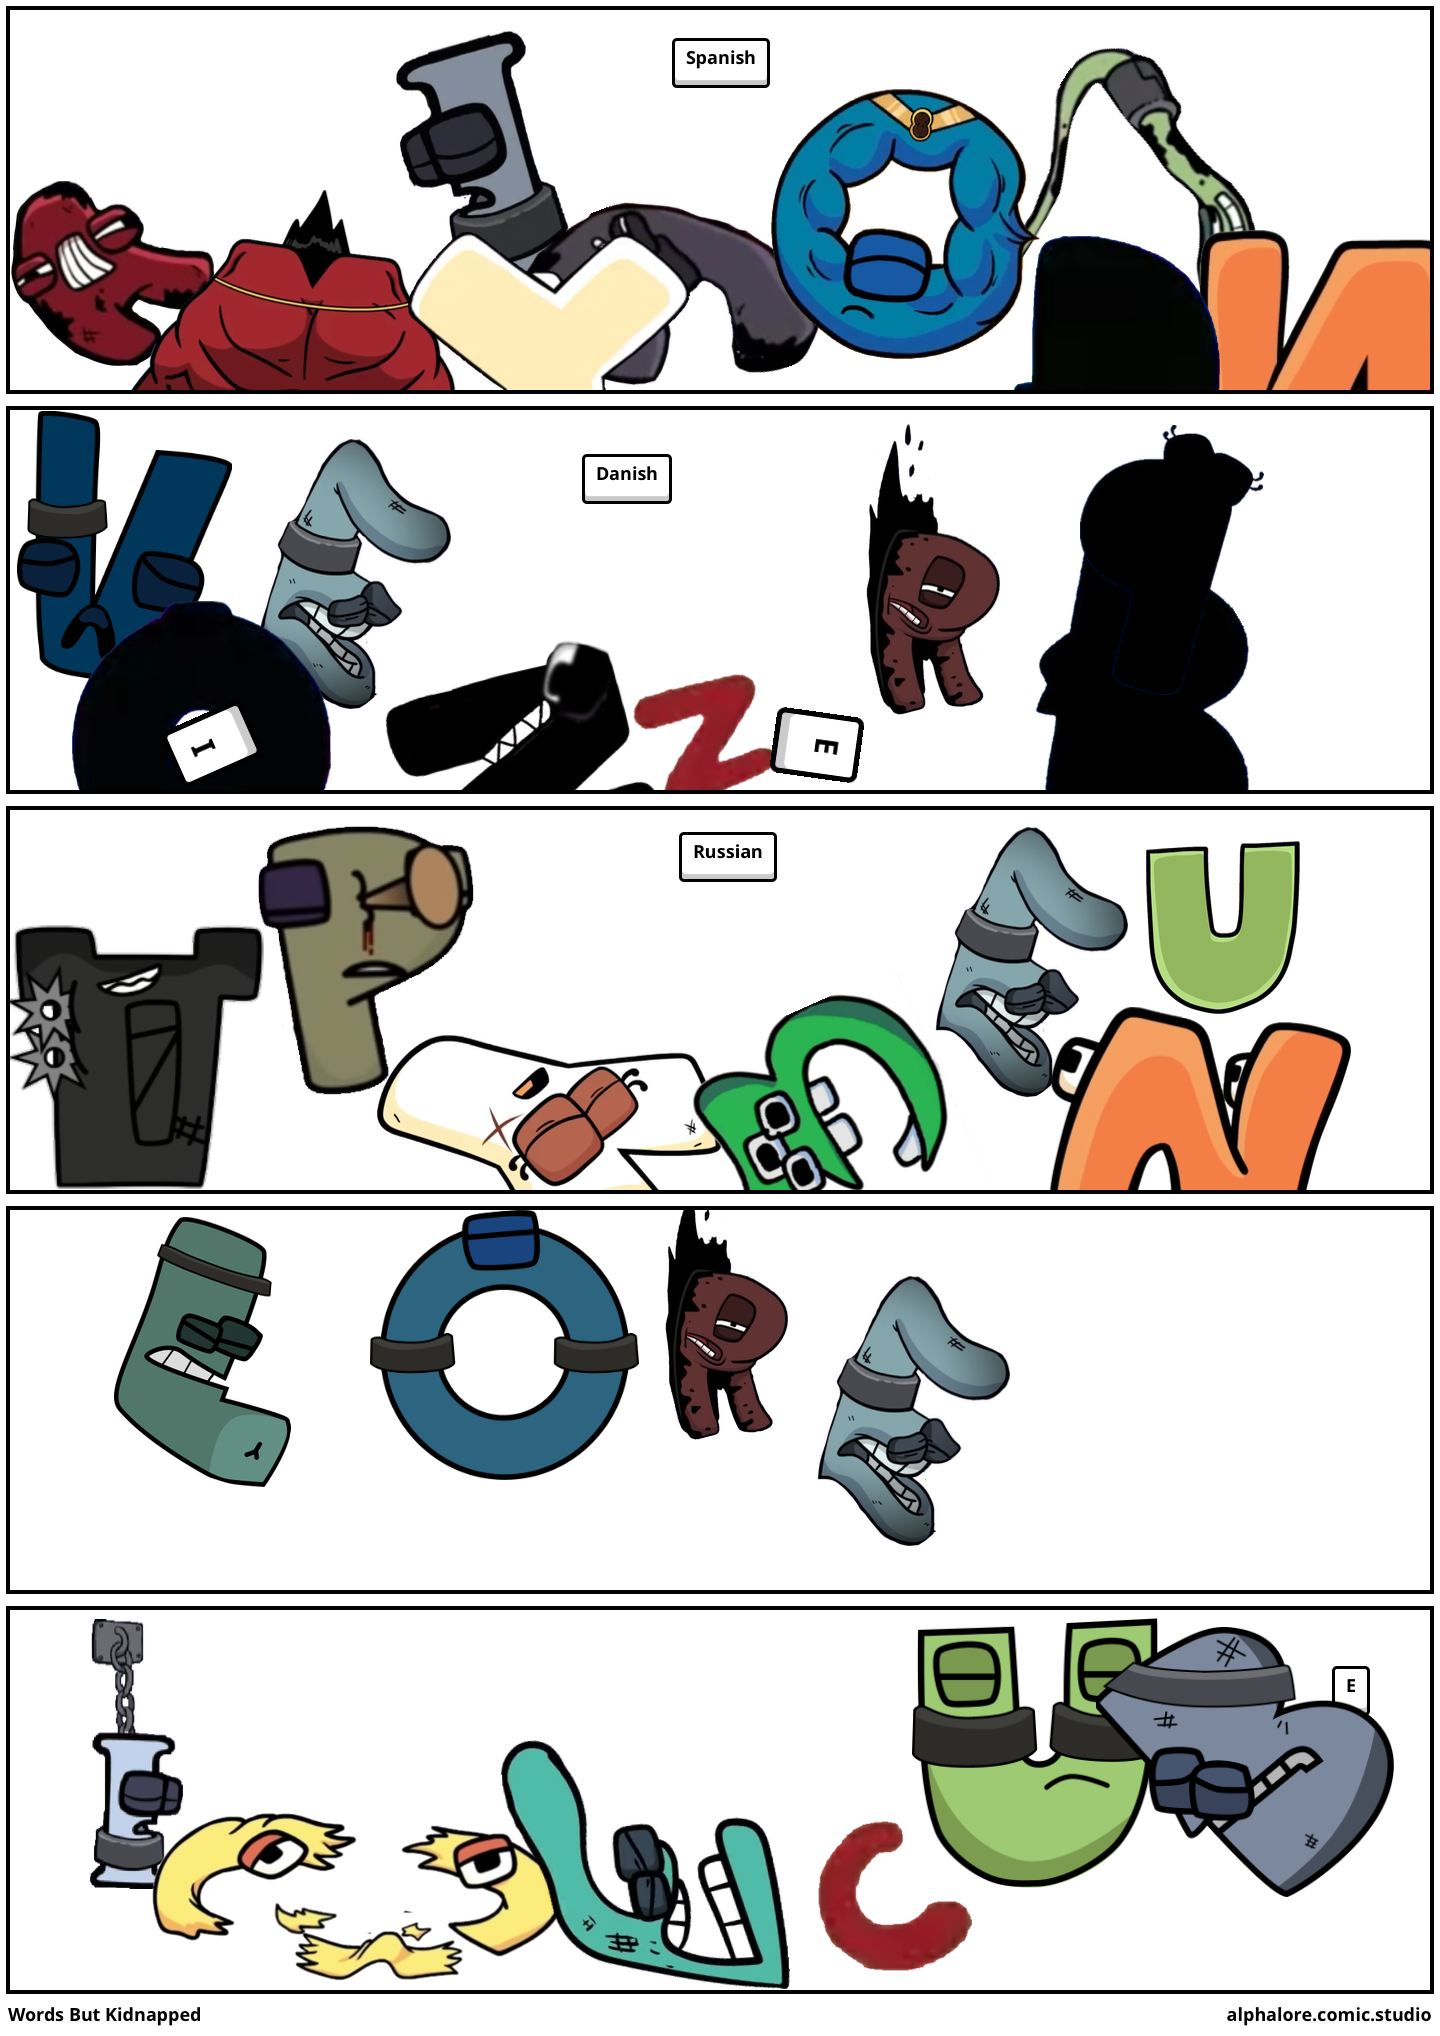 Alphabet Lore 1 Year Anniversary Comic! ( Sadly the 3 in the comic is not  official ) : r/alphabetfriends